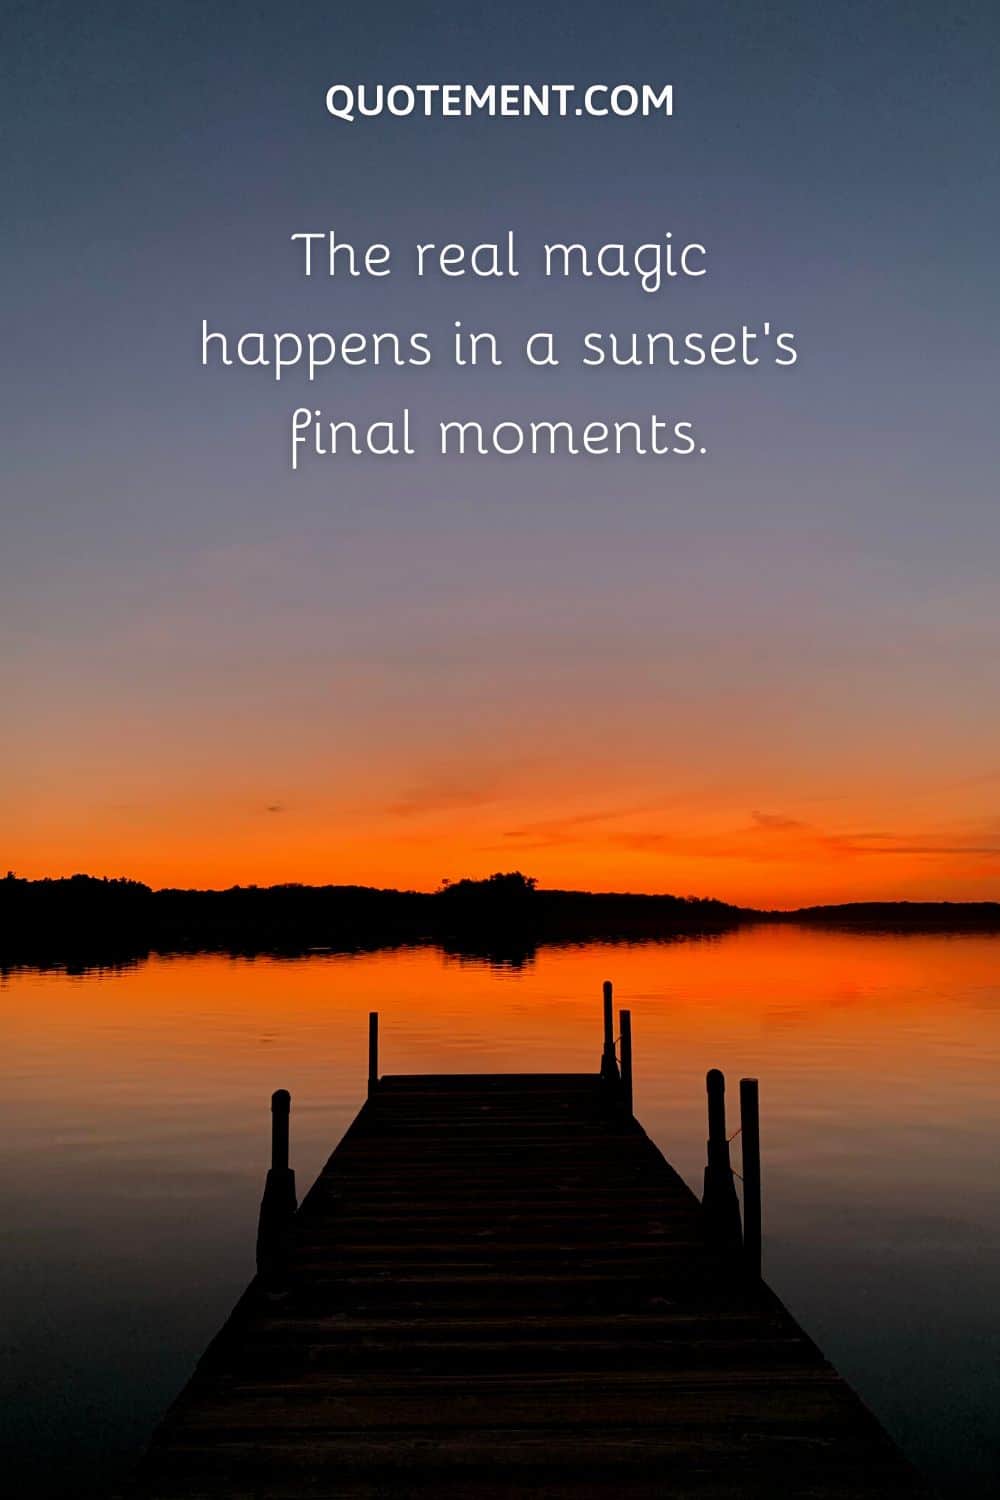 The real magic happens in a sunset’s final moments.